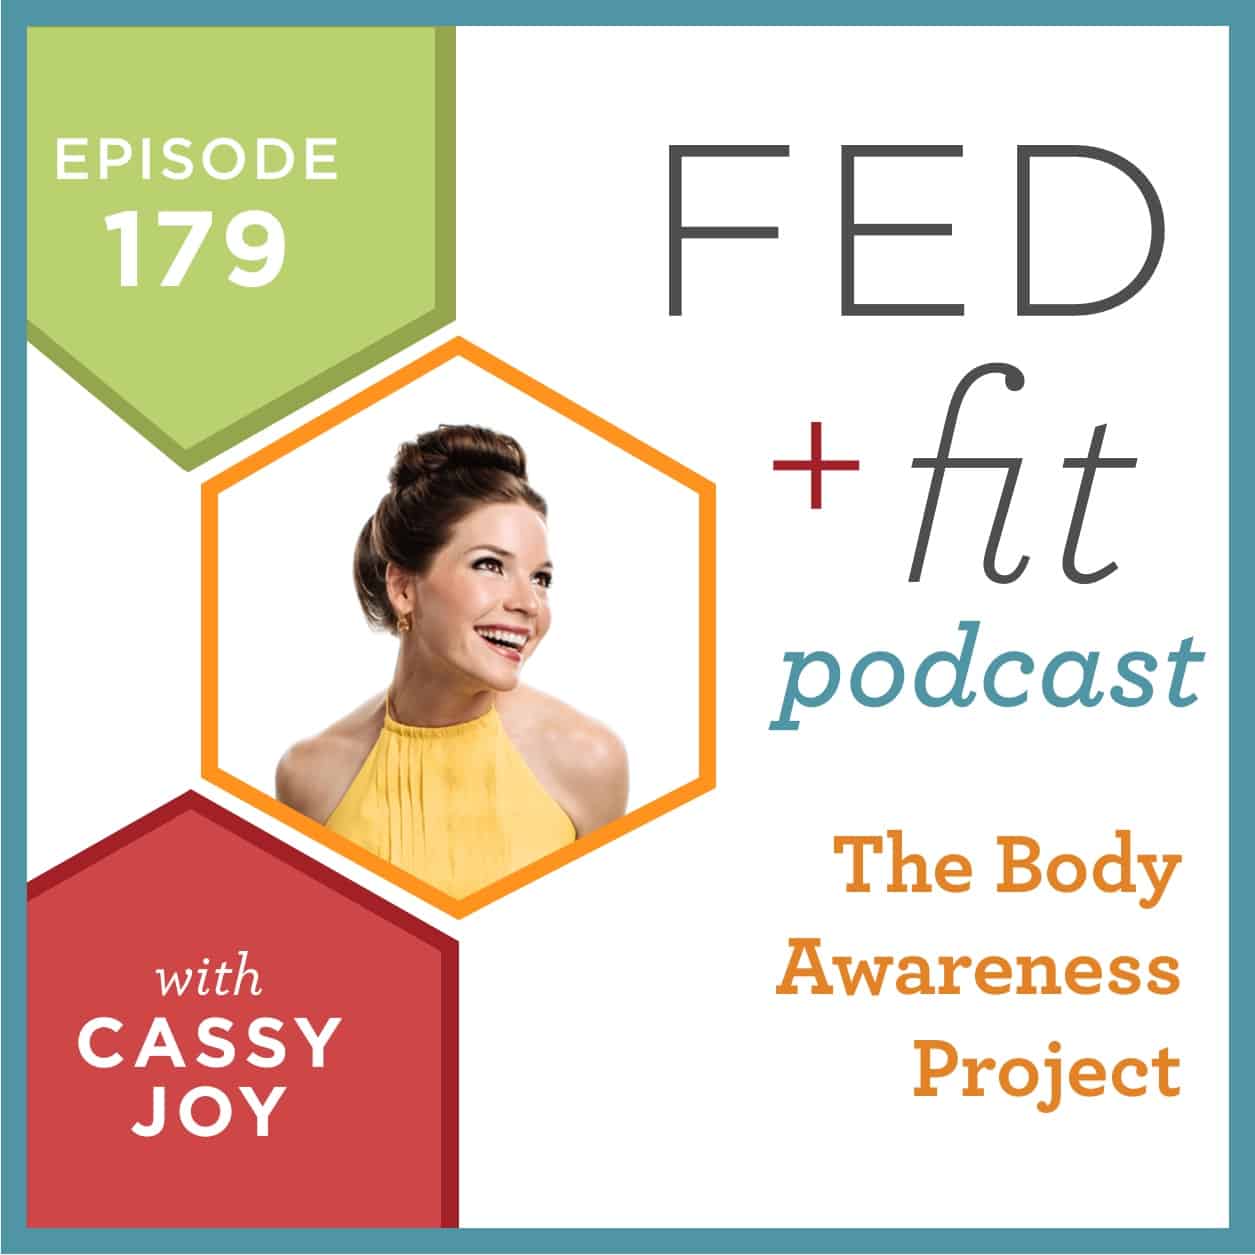 Fed and Fit podcast graphic, episode 179 The Body Awareness Project with Cassy Joy